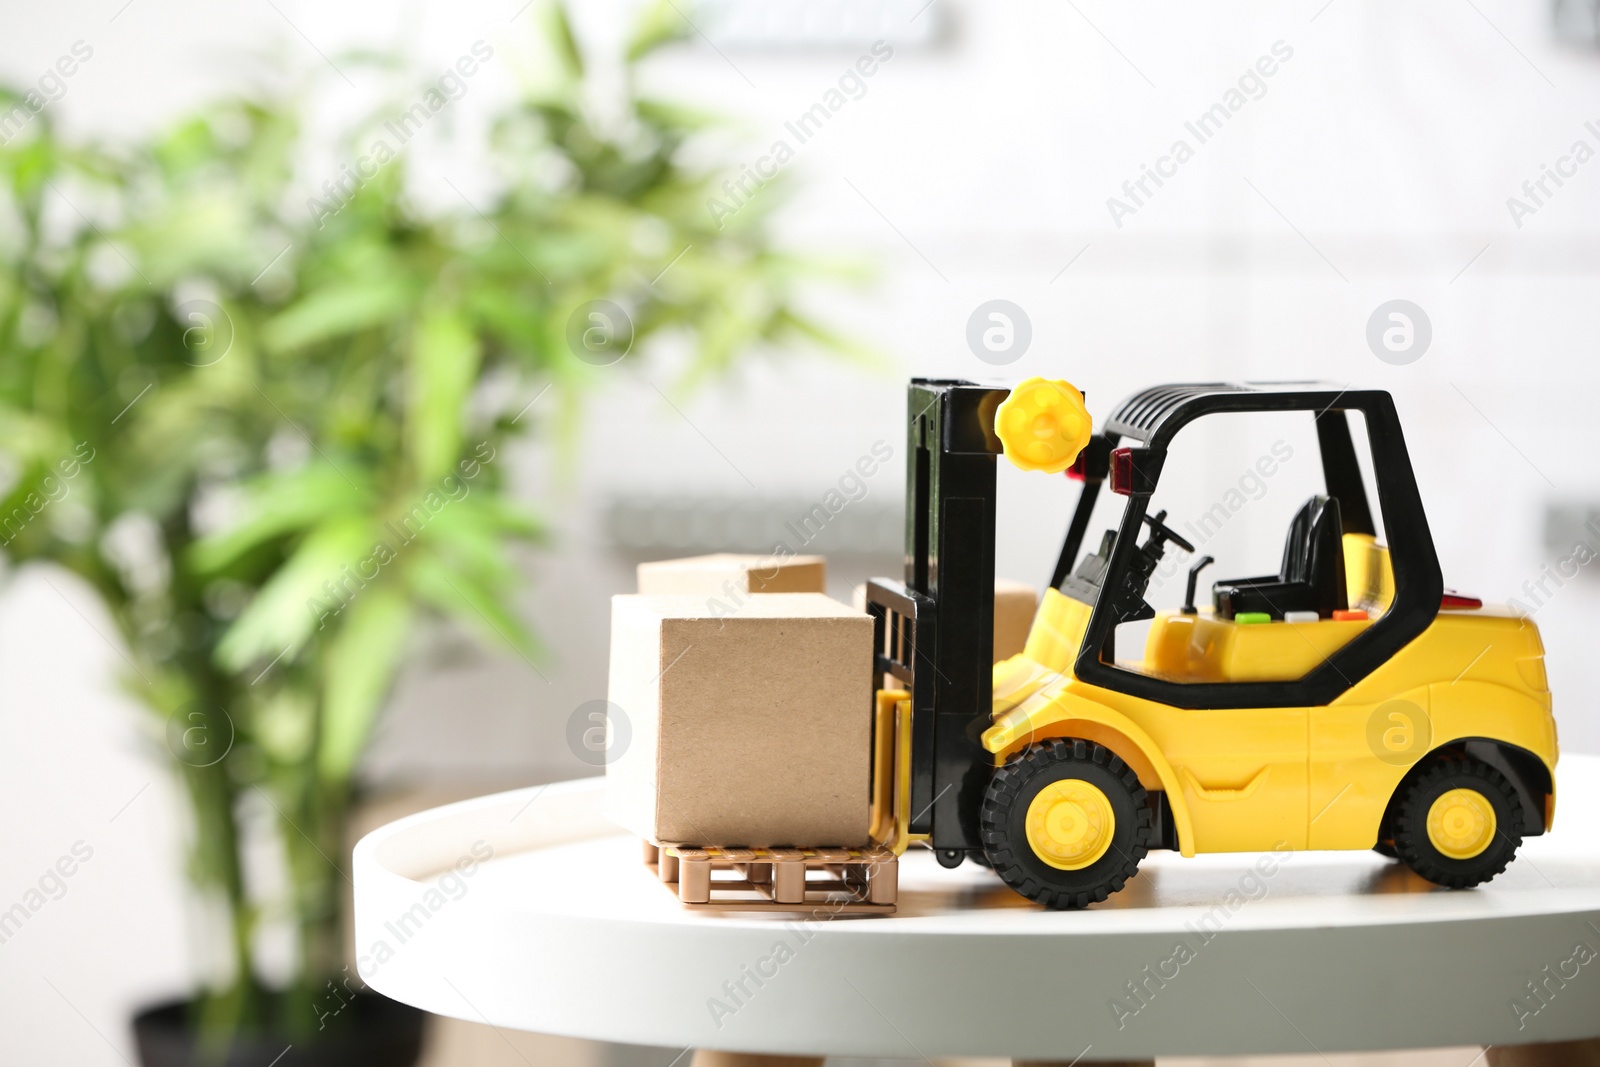 Photo of Toy forklift with cardboard box on table against blurred background. Courier service